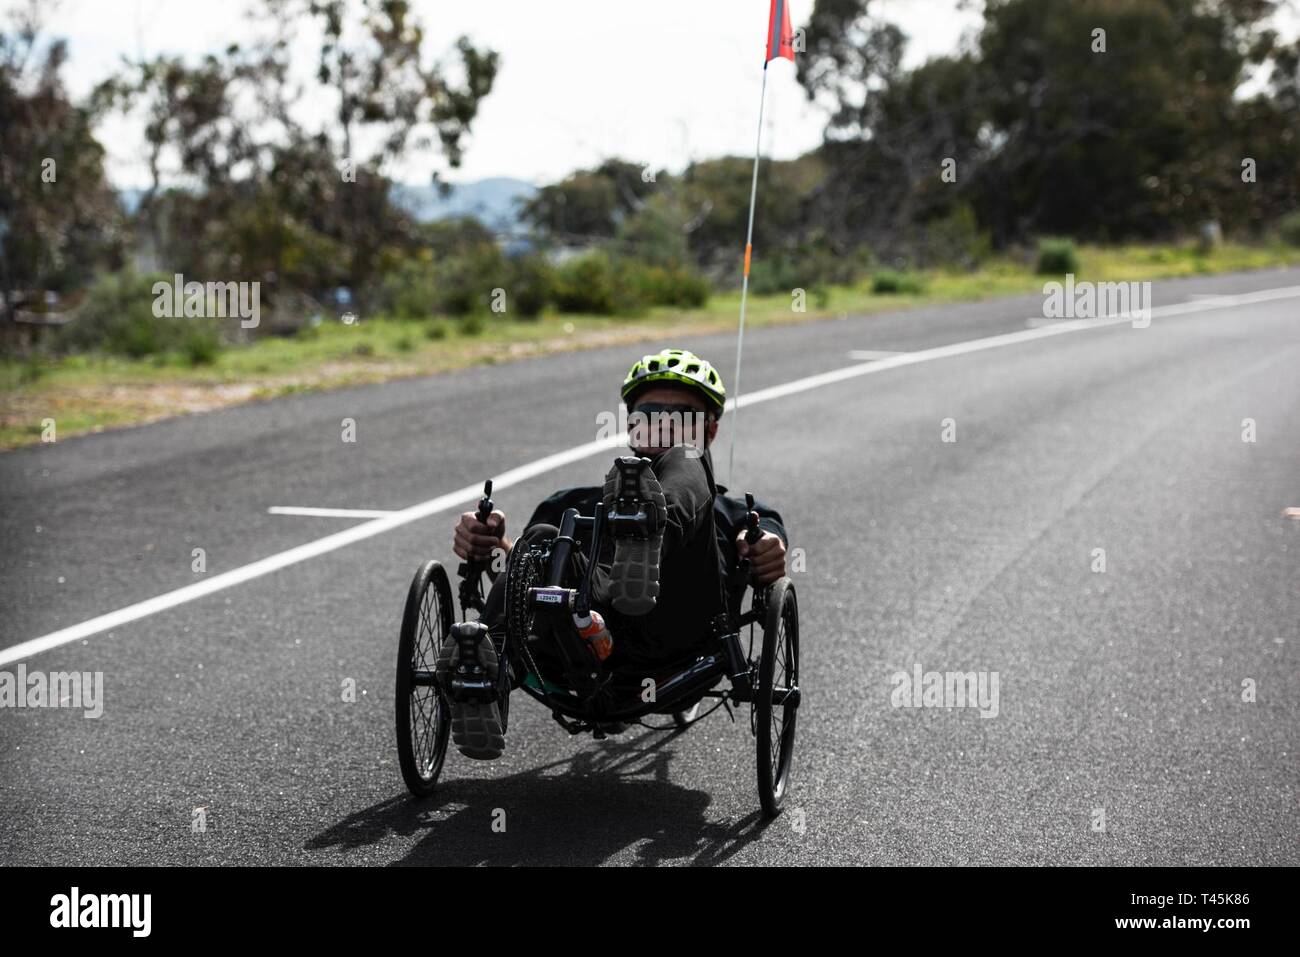 An athlete leads the way during practice for hand cycling at the 9th annual Marine Corps Trials at Marine Corps Base Camp Pendleton, California, March 1, 2019. The Marine Corps Trials promotes recovery and rehabilitation through adaptive sports participation and develops camaraderie among recovering service members and veterans. Additionally, the competition is an opportunity for participants to demonstrate physical and mental achievements and serves as the primary venue to select Marine Corps participants for the DoD Warrior Games. (Official U.S. Marine Corps Stock Photo